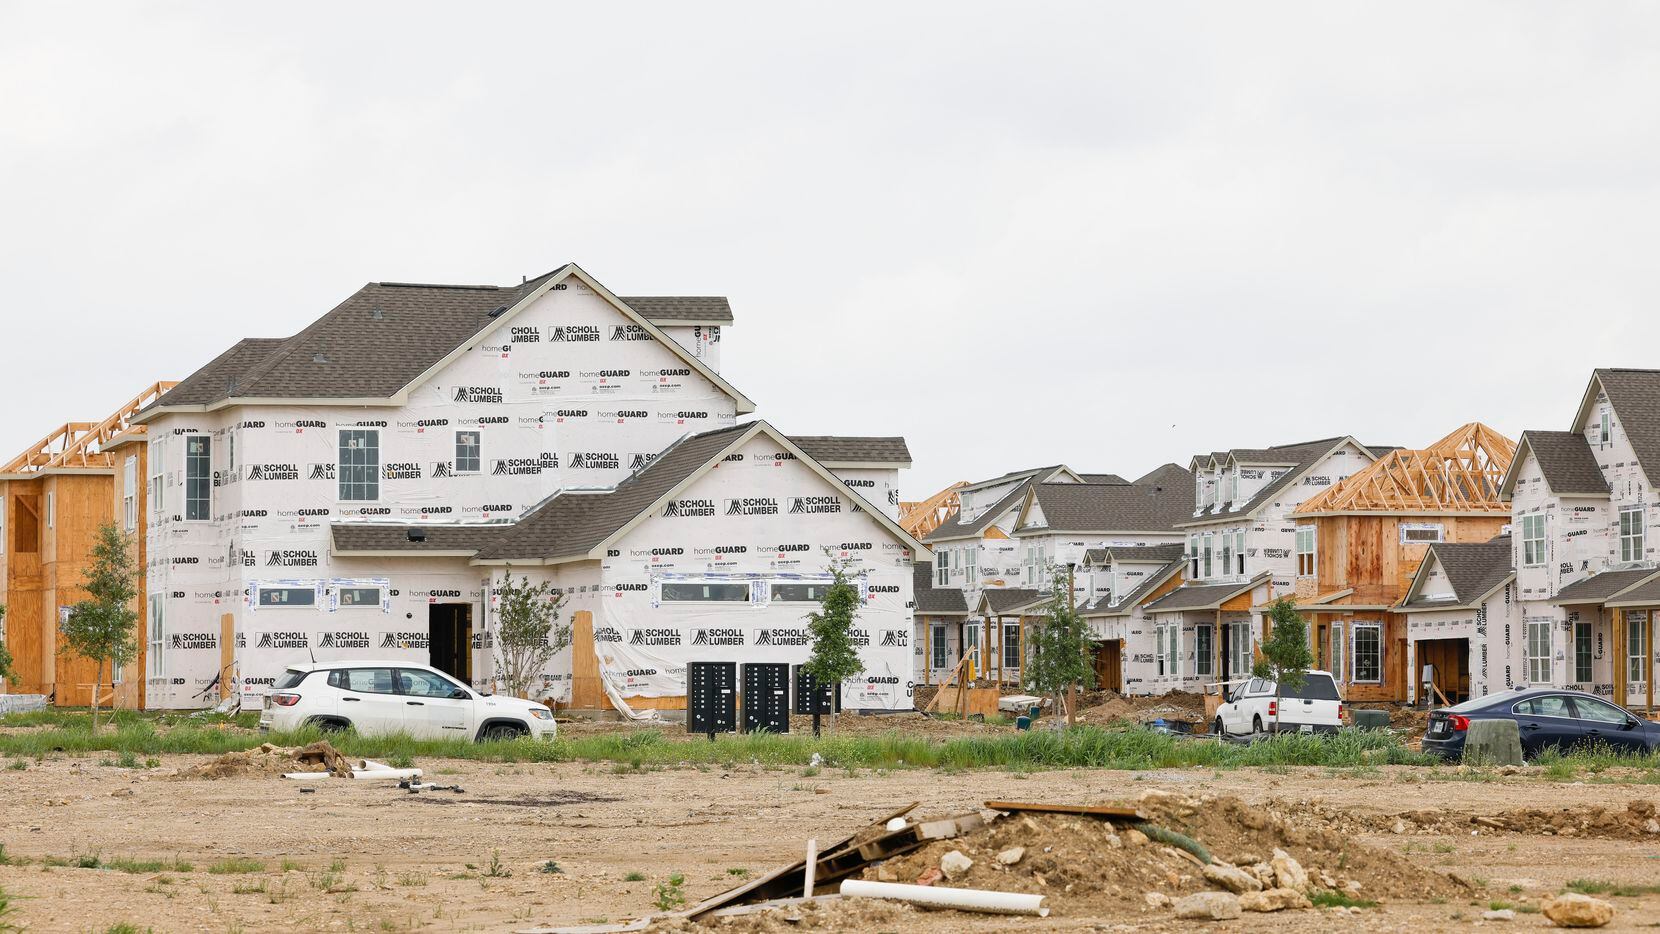 Rental townhomes and single-family houses are shown under construction at the Residences at...